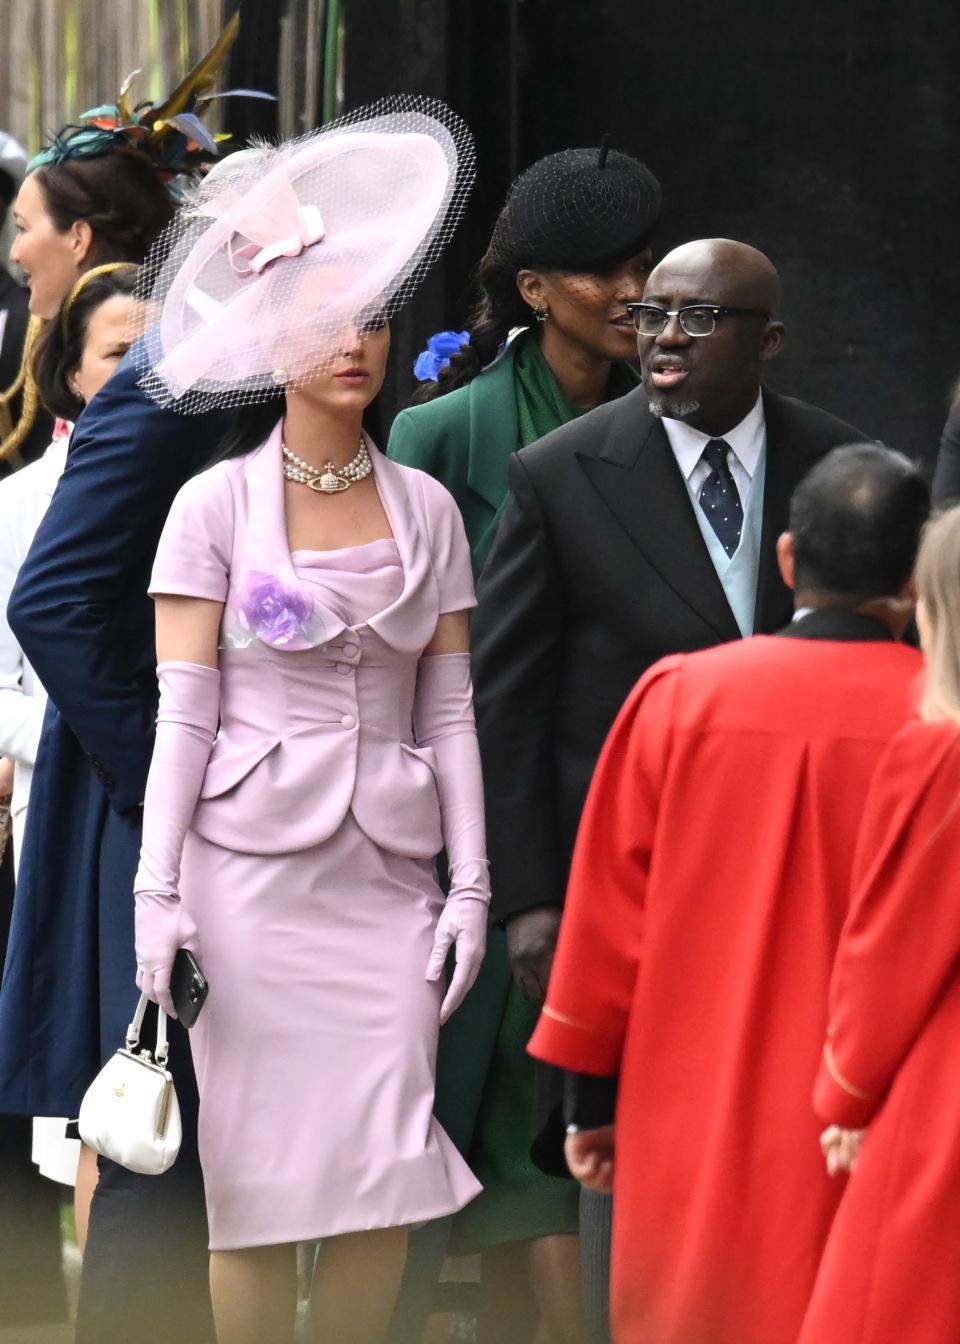 Katy Perry and British Vogue editor-in-chief Edward Enninful arrive at Westminster Abbey ahead of the coronation of King Charles III and Queen Camilla on May 6, 2023 in London, England.